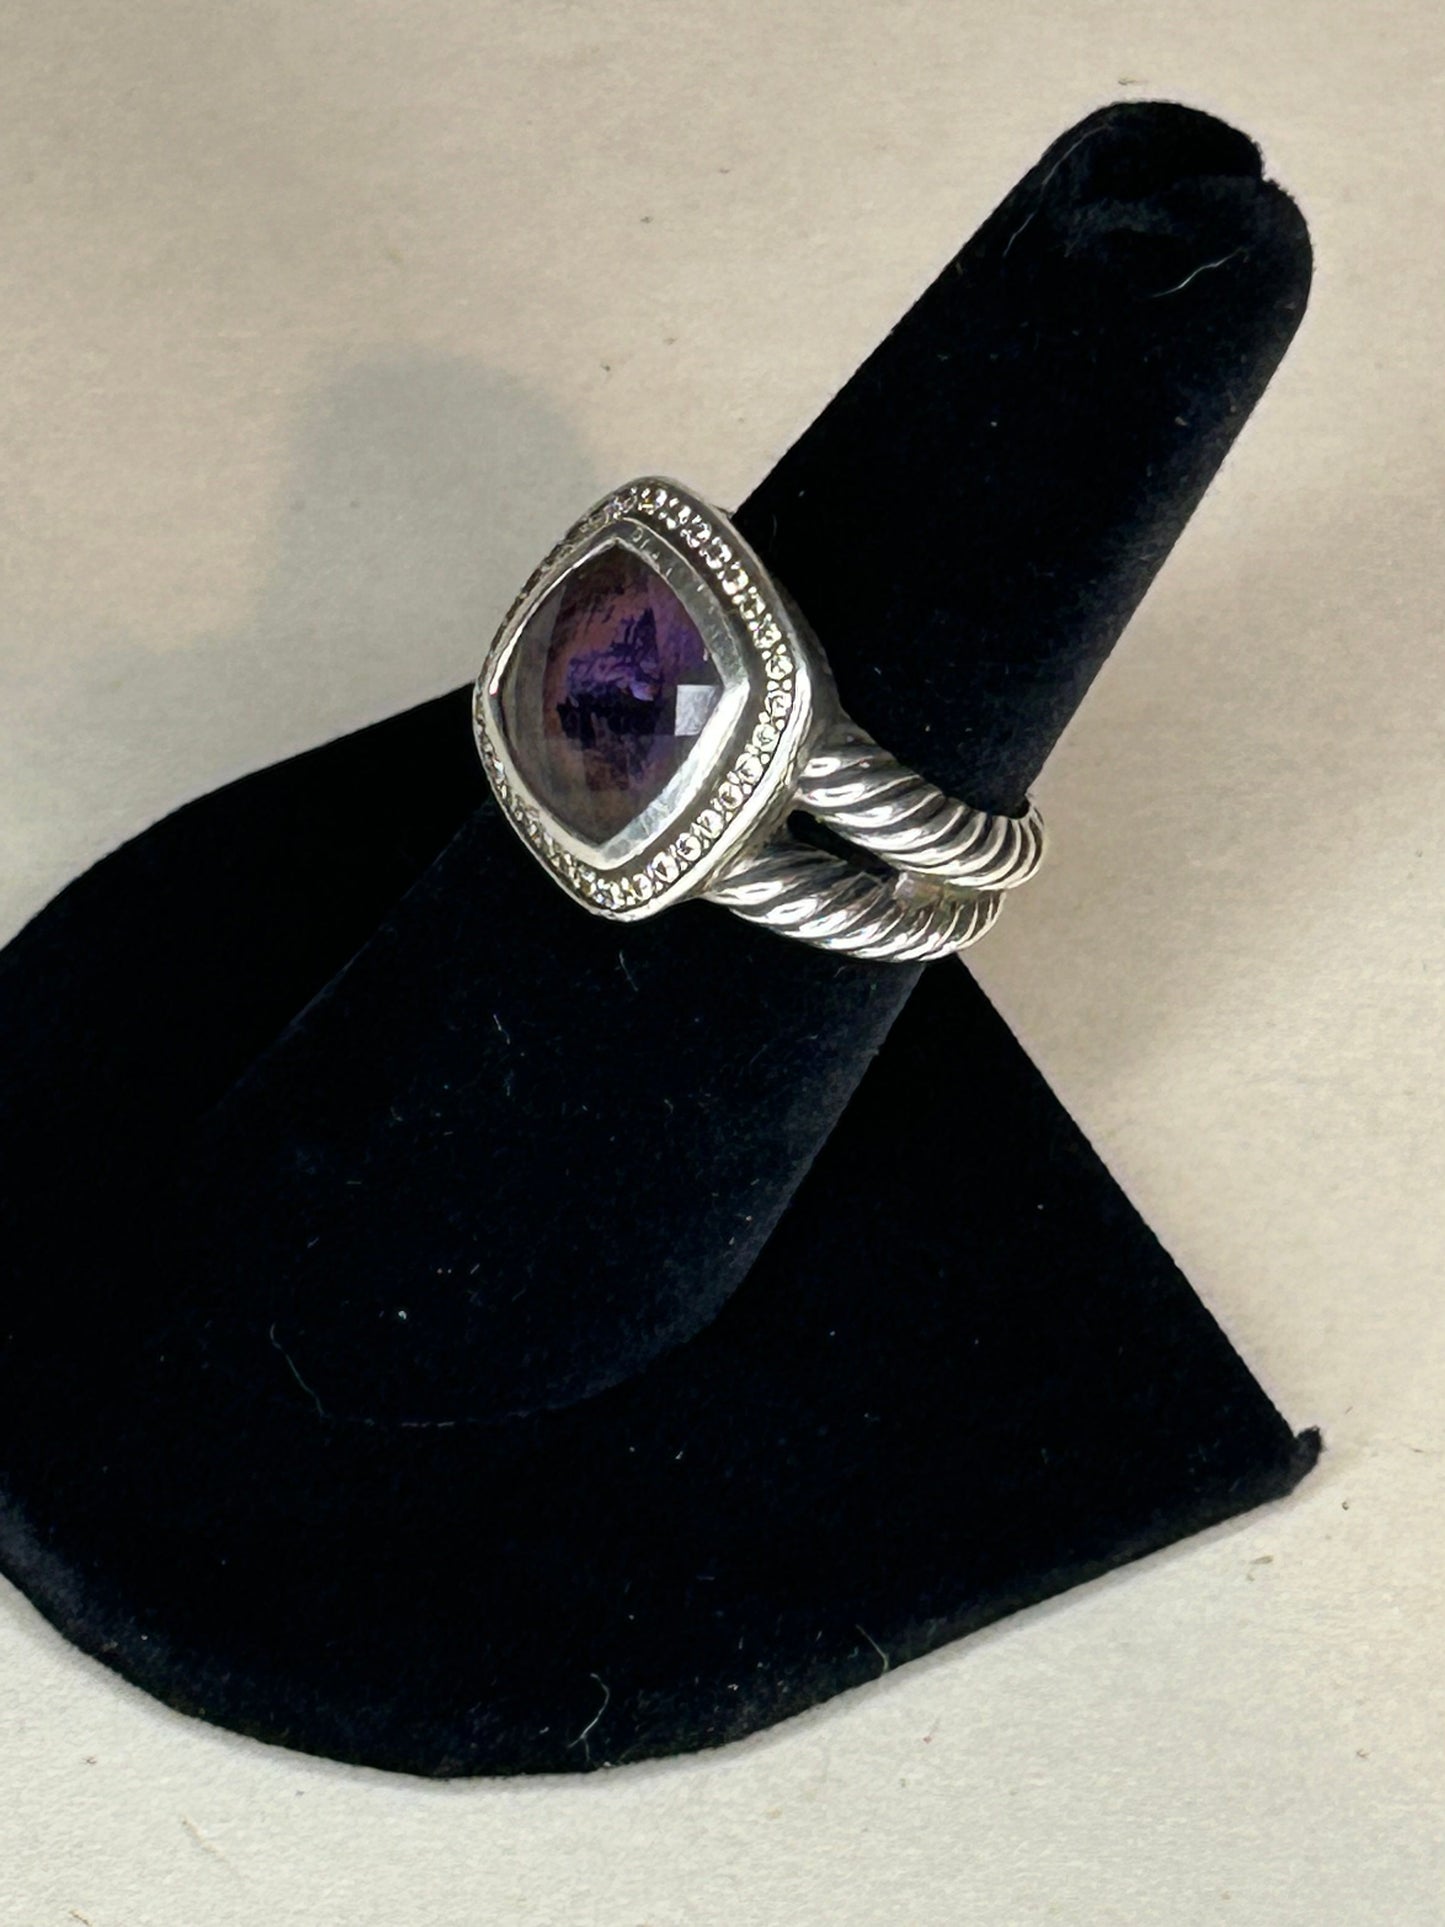 One Owner Genuine David Yurman Albion® Ring in Sterling Silver with Lavender Amethyst and Pavé Diamonds